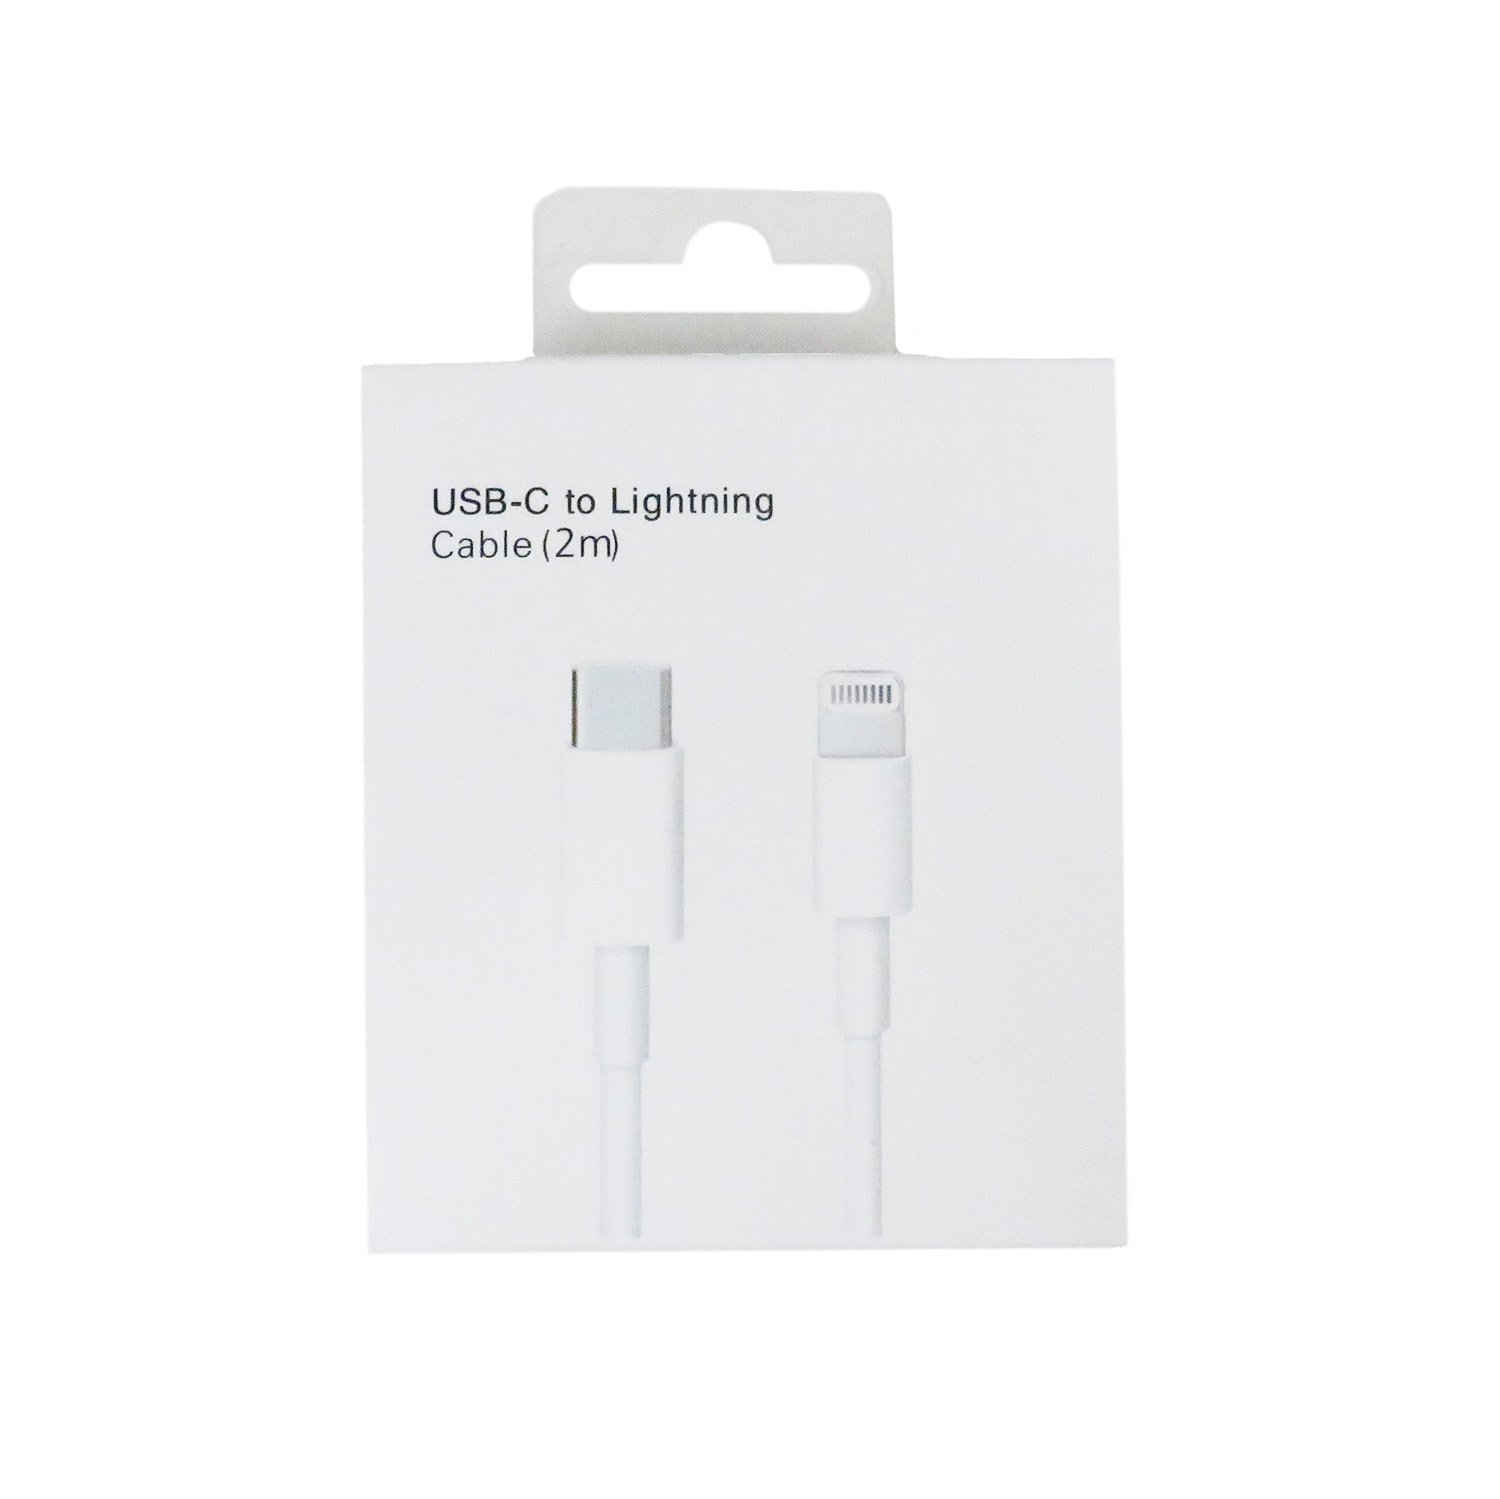 Apple Lightning to USB Cable, 2M